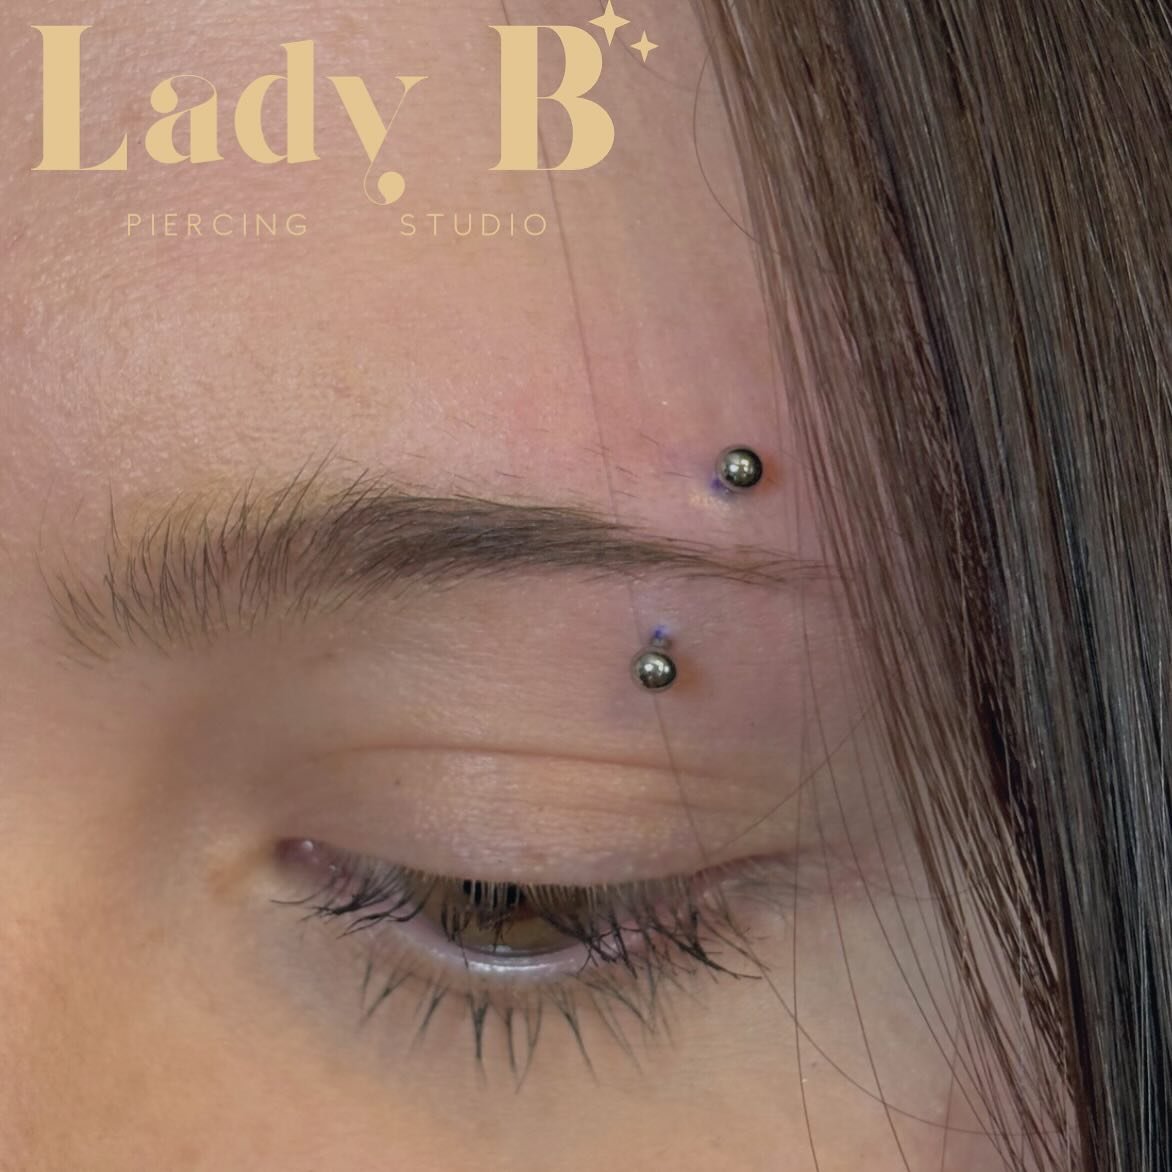 Eyebrow piercing from yesterday! 🤍
Piercing done by Erin at @ladybpiercings  using an @invictus_bodyjewelry Titanium curved bar